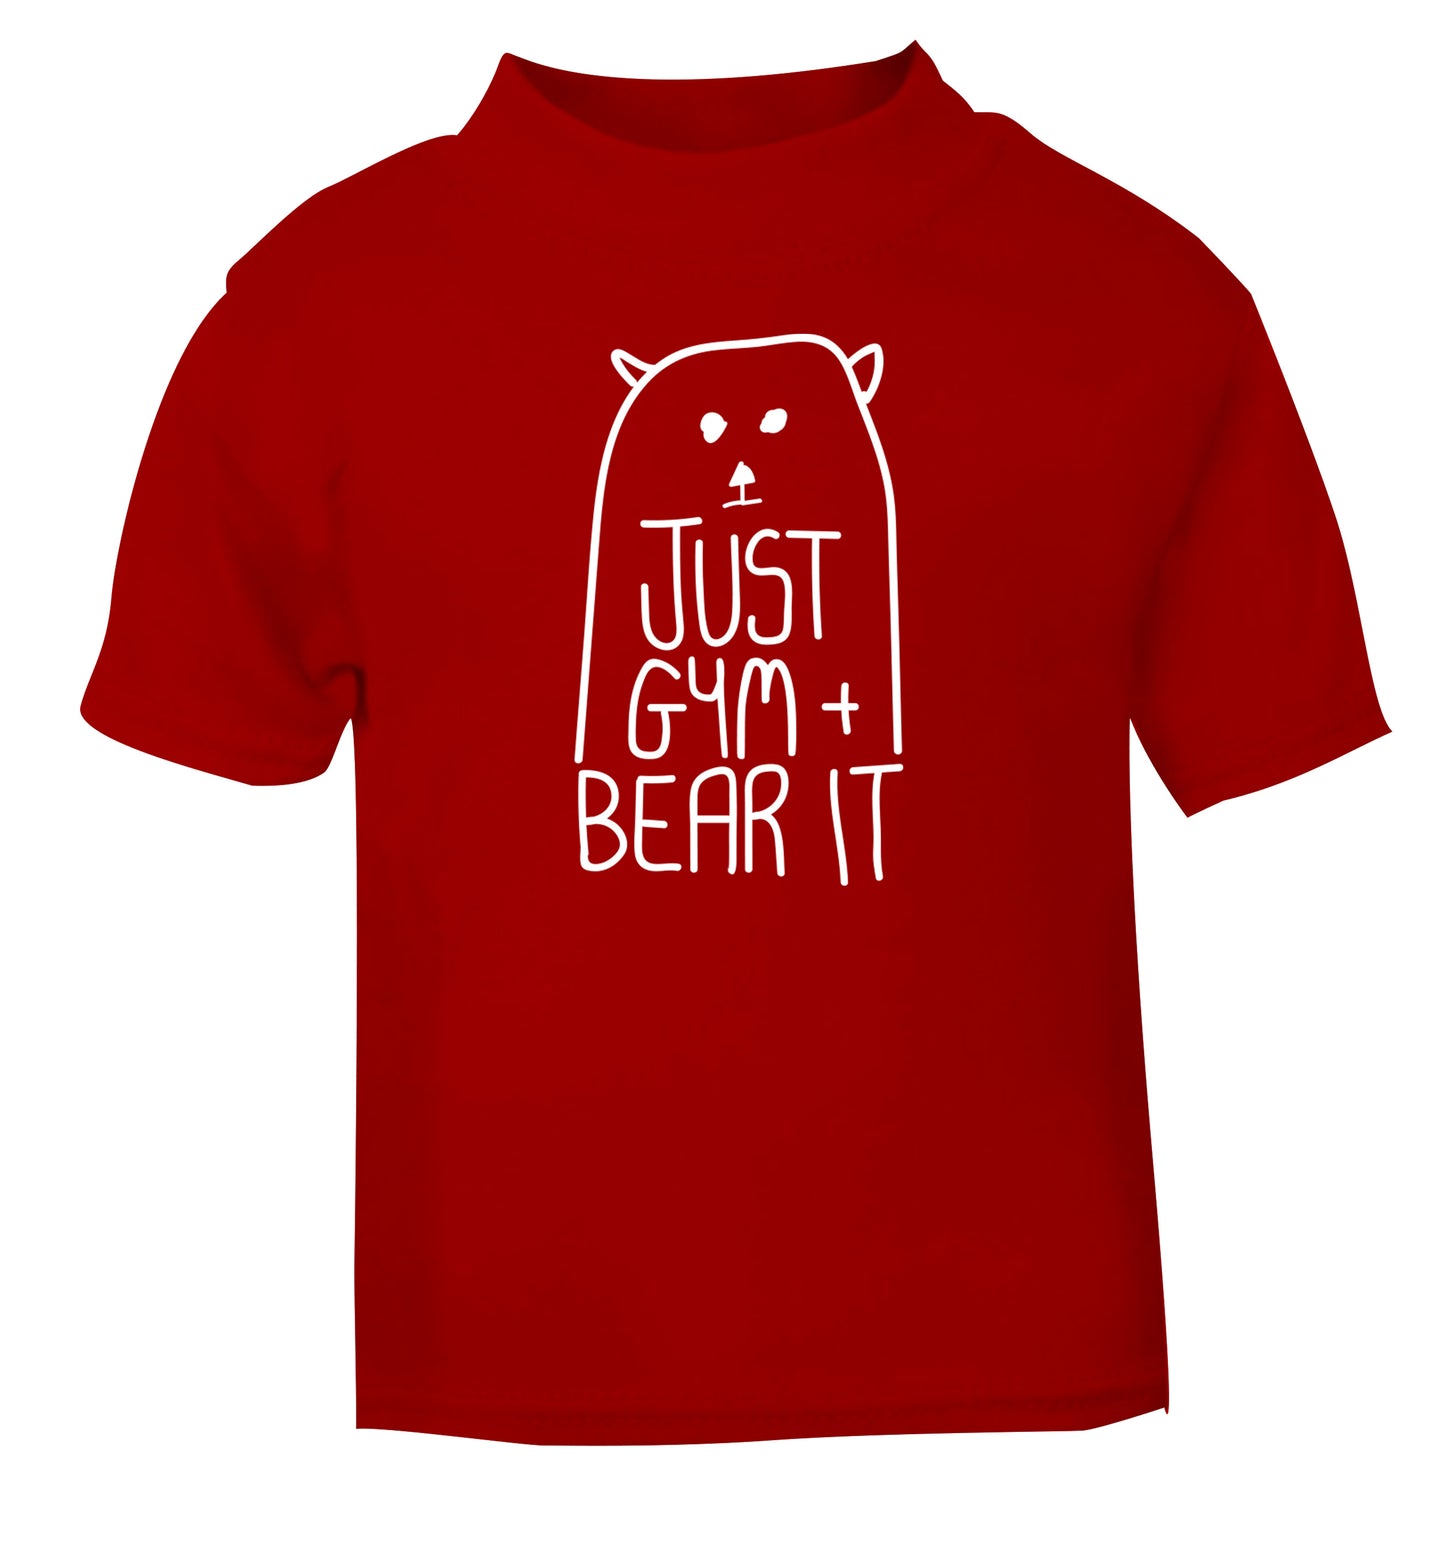 Just gym and bear it red Baby Toddler Tshirt 2 Years